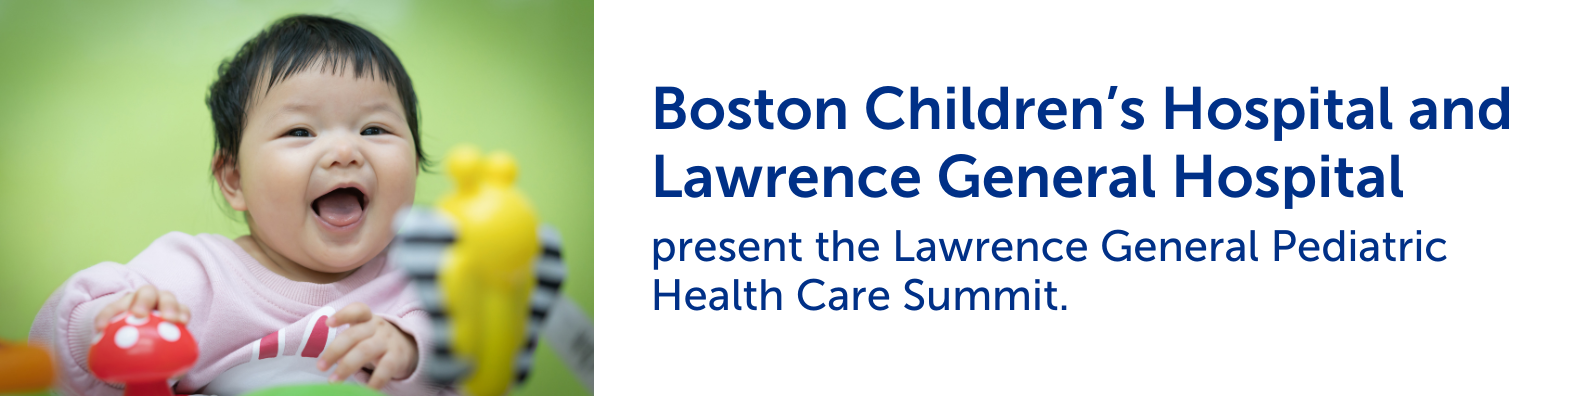 Boston Children’s Hospital and Lawrence General Hospital present the Lawrence General Pediatric Health Care Summit Banner